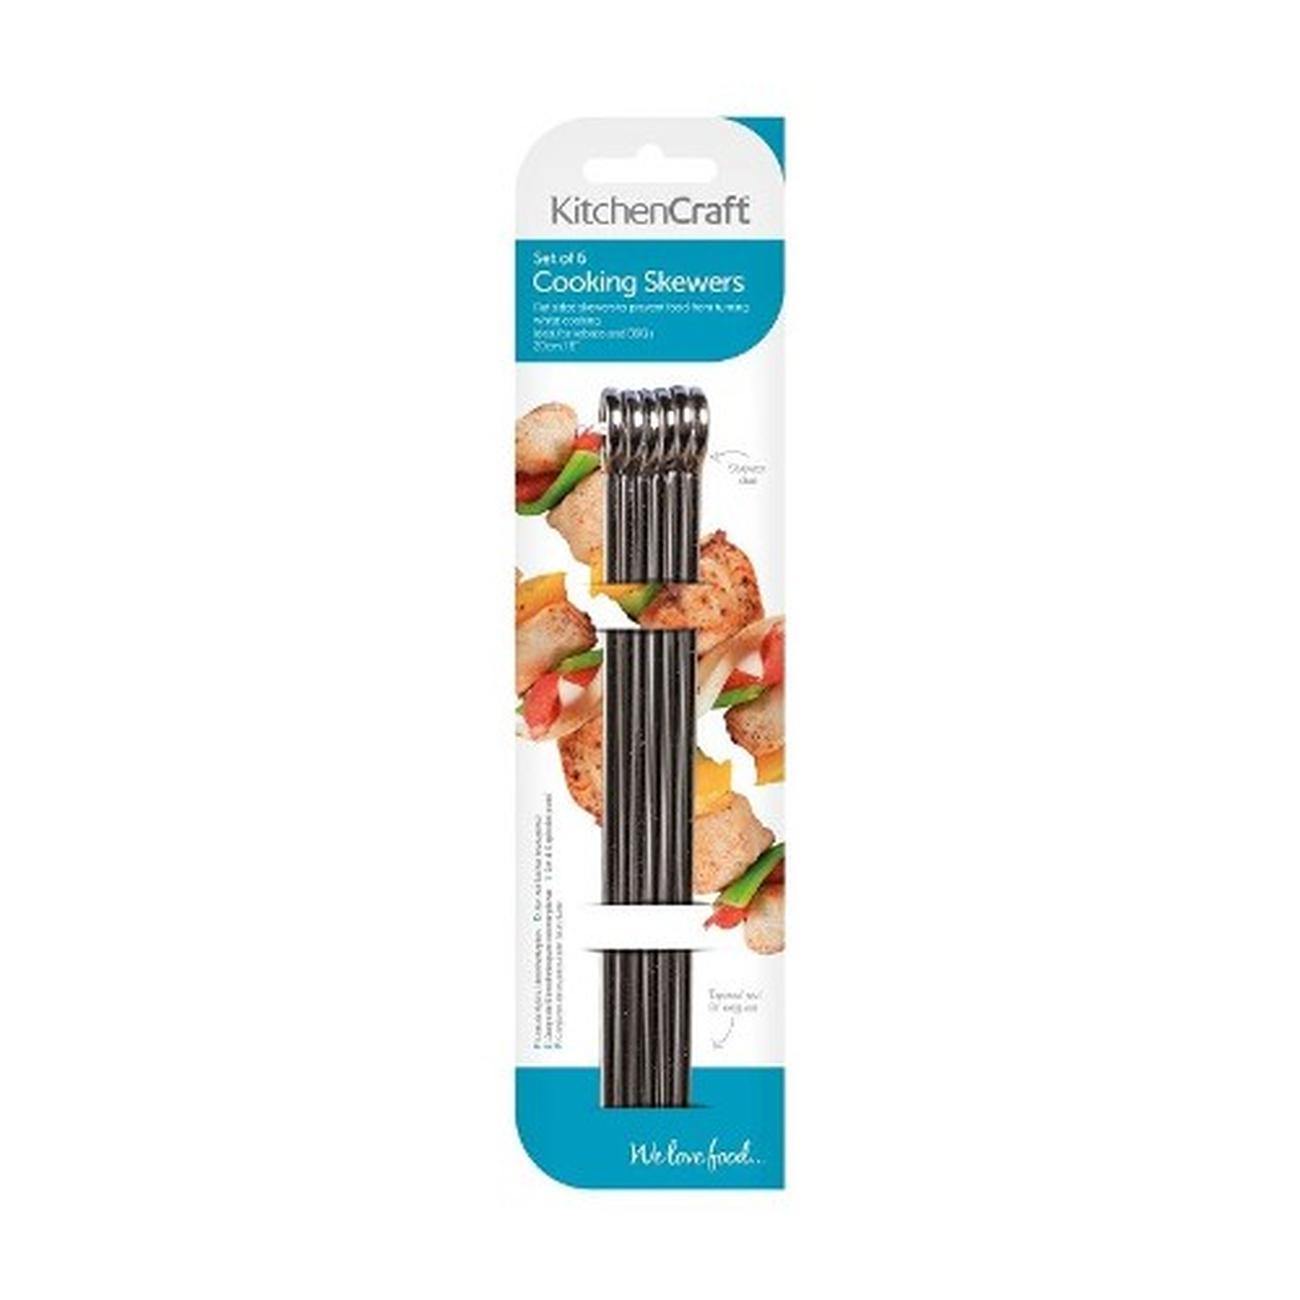 kitchencraft-flat-sided-skewers-6pc-20cm - KitchenCraft Flat Sided Skewers 20cm Pack of 6